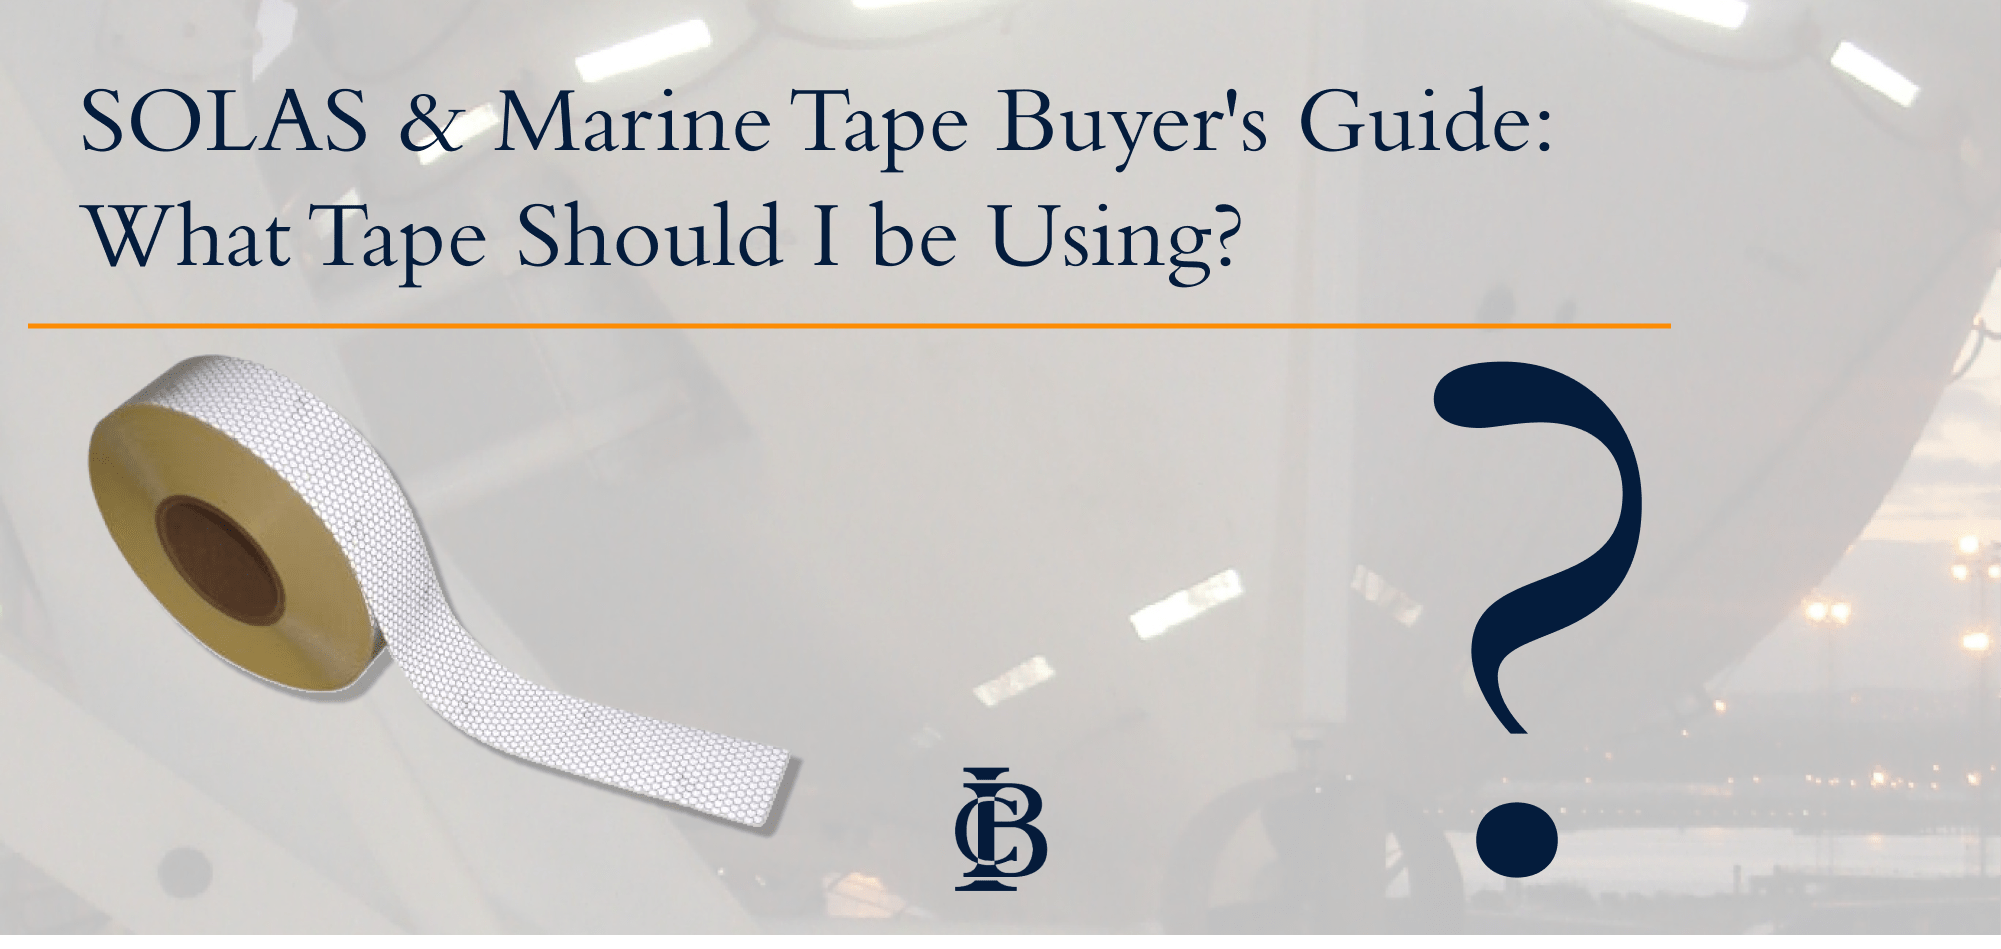 I.C. Brindle's SOLAS & Marine Tape Buyer's Guide: What Tape Should I be Using?